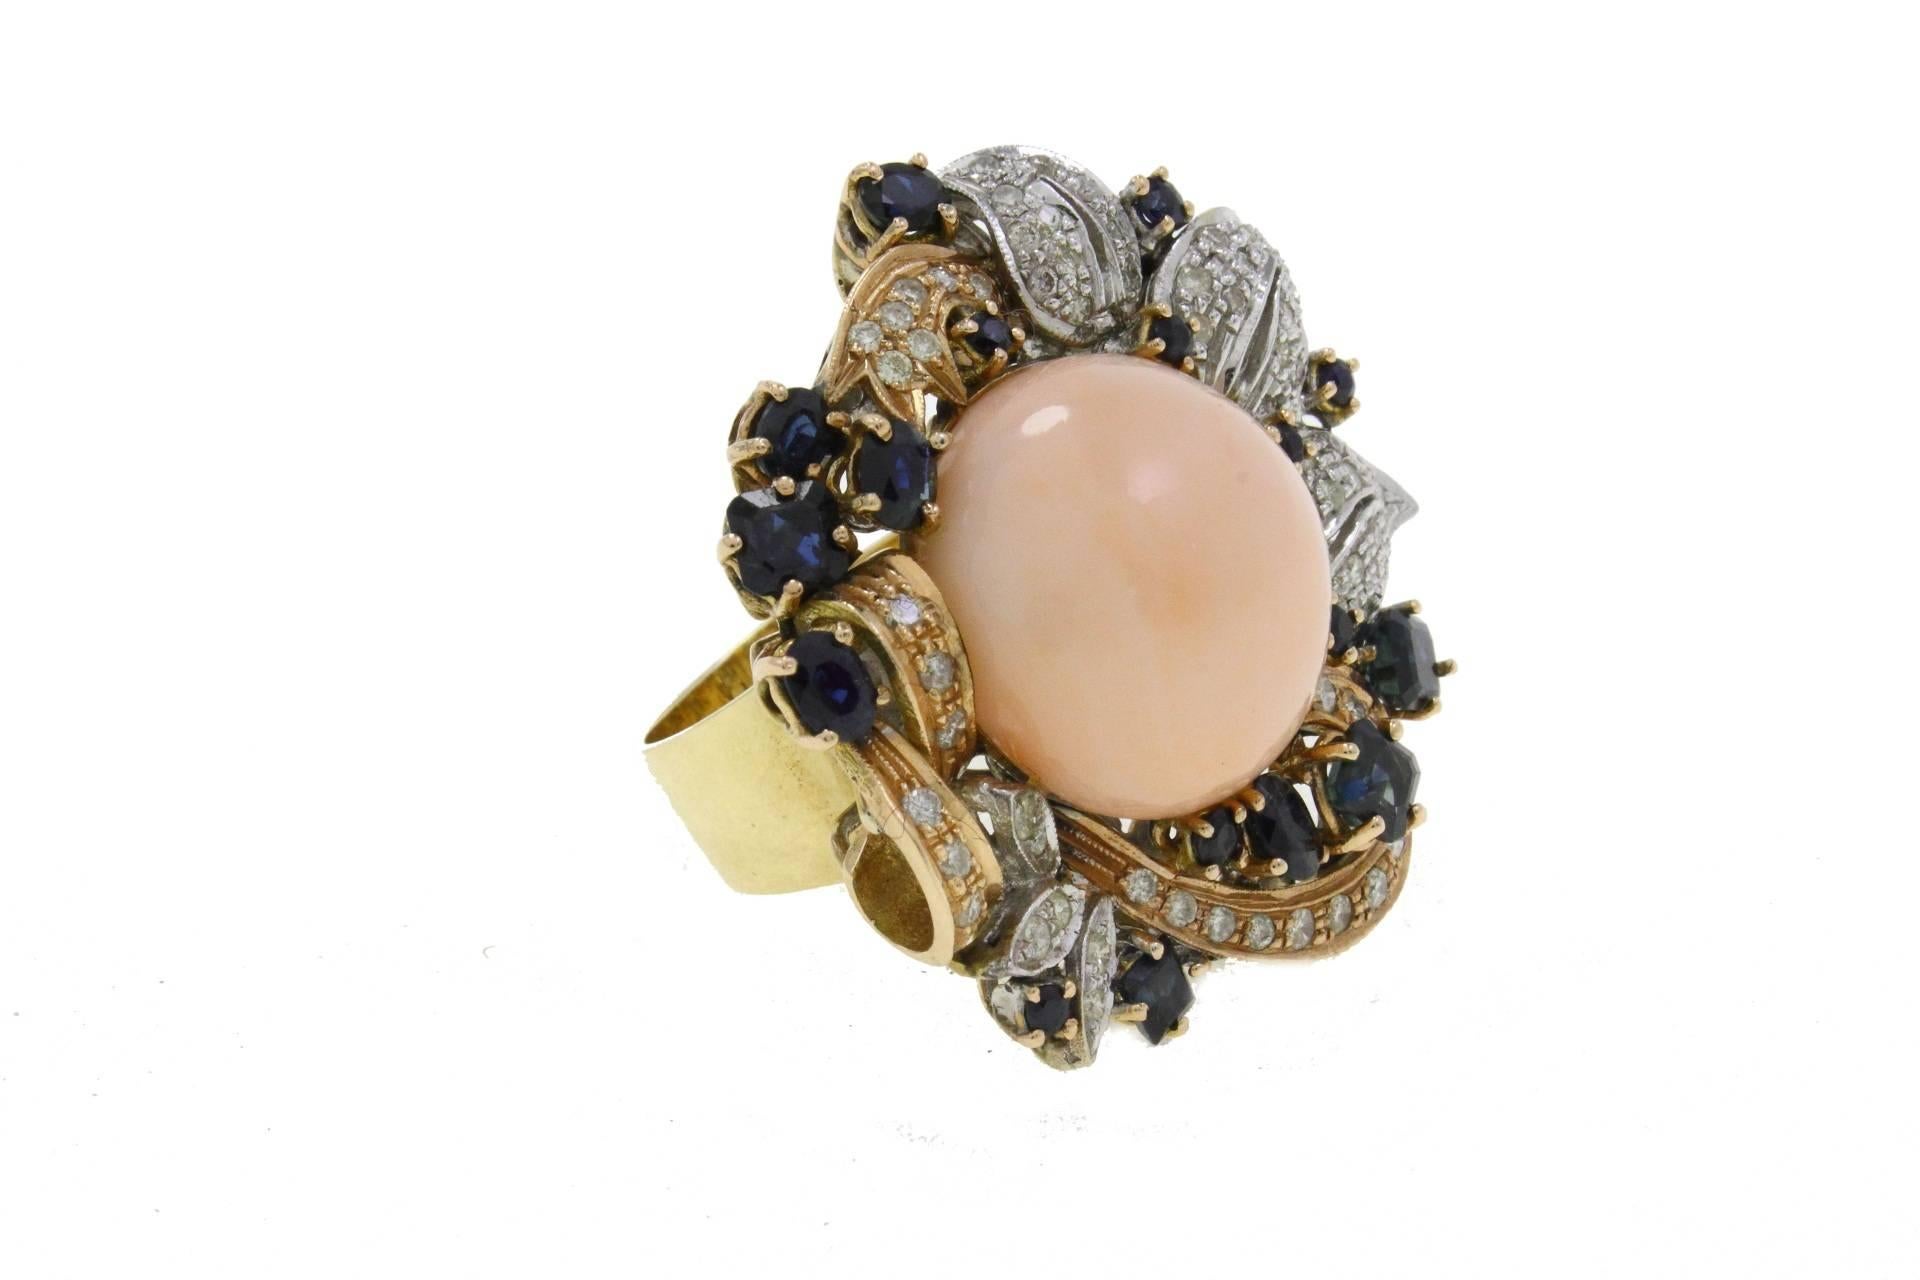 Shiny ring in 14kt white and yellow gold with a central pink coral circle surrounded by a crown of diamonds and blue sapphires.

diamonds 1.23kt
sapphires 4.18kt
coral 4.10gr
tot weight24gr
US Size
Width 1.38 inches
Lenght 1.57 inches
Diameter 0.86